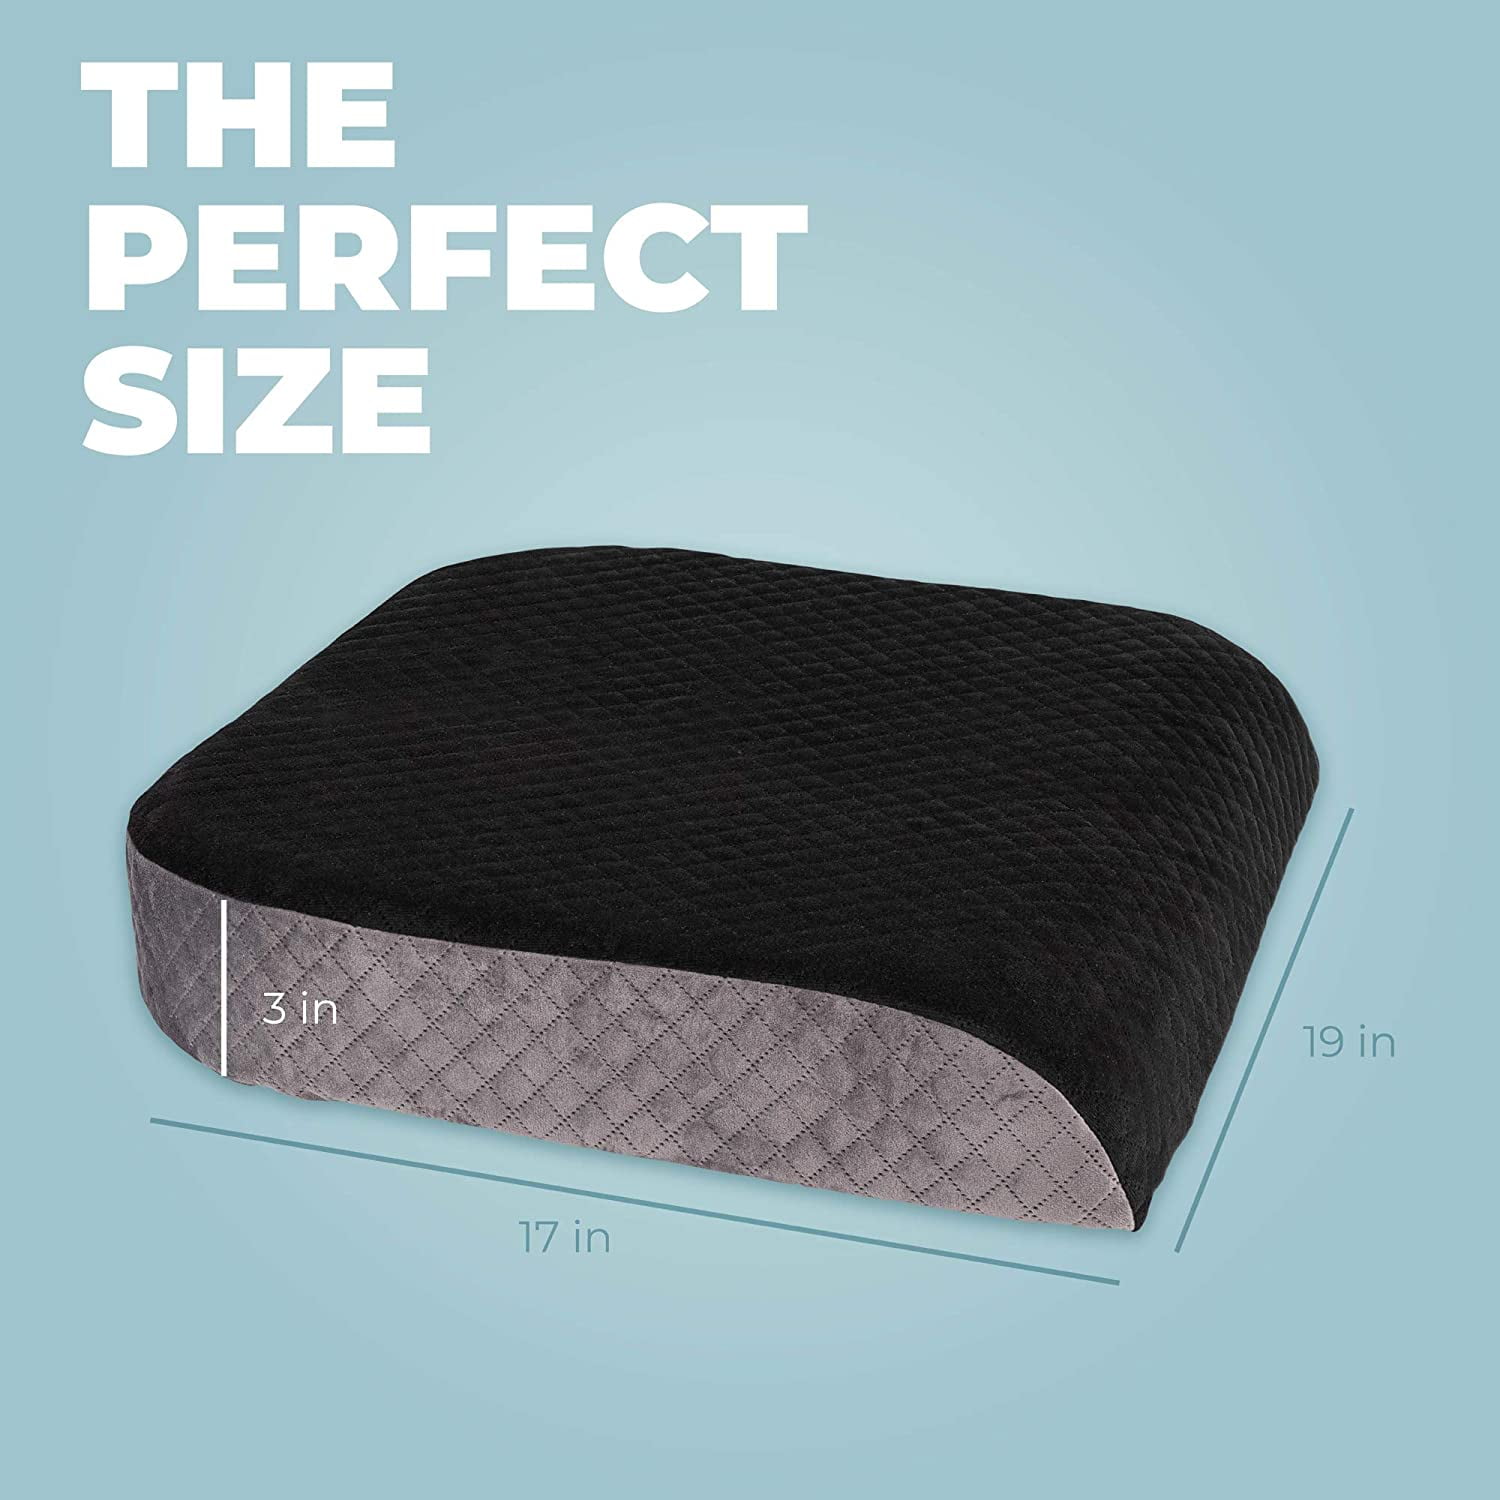 Pure Comfort And Chic Style With seat cushion for truck drivers